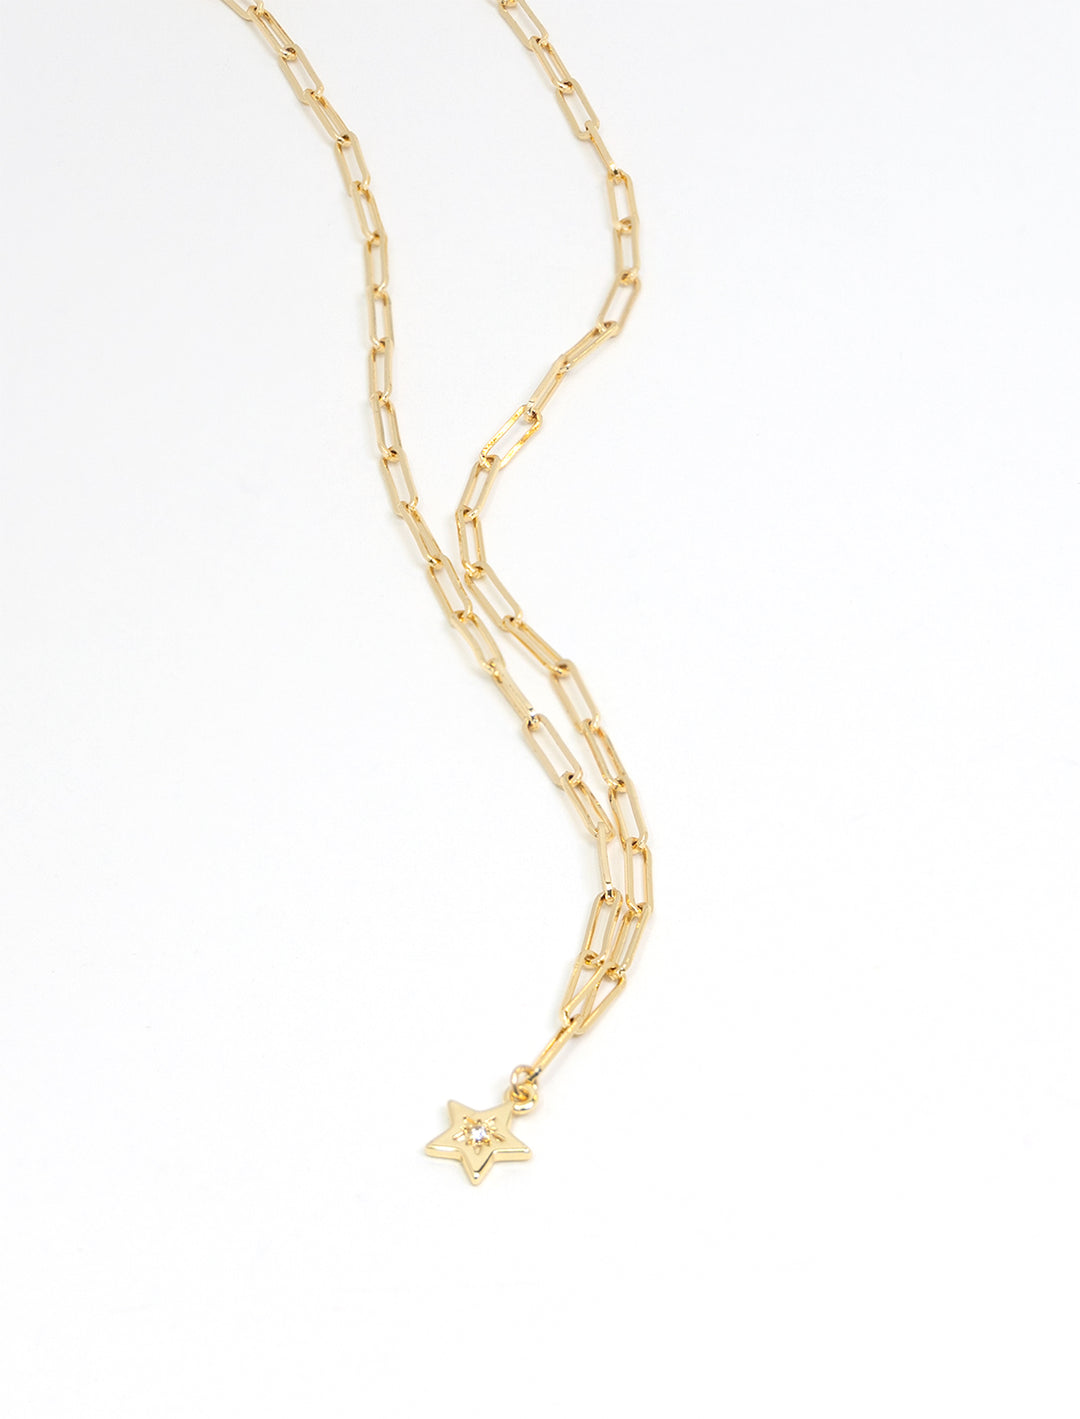 Stylized laydown of Marit Rae's star on paperclip chain necklace in gold.